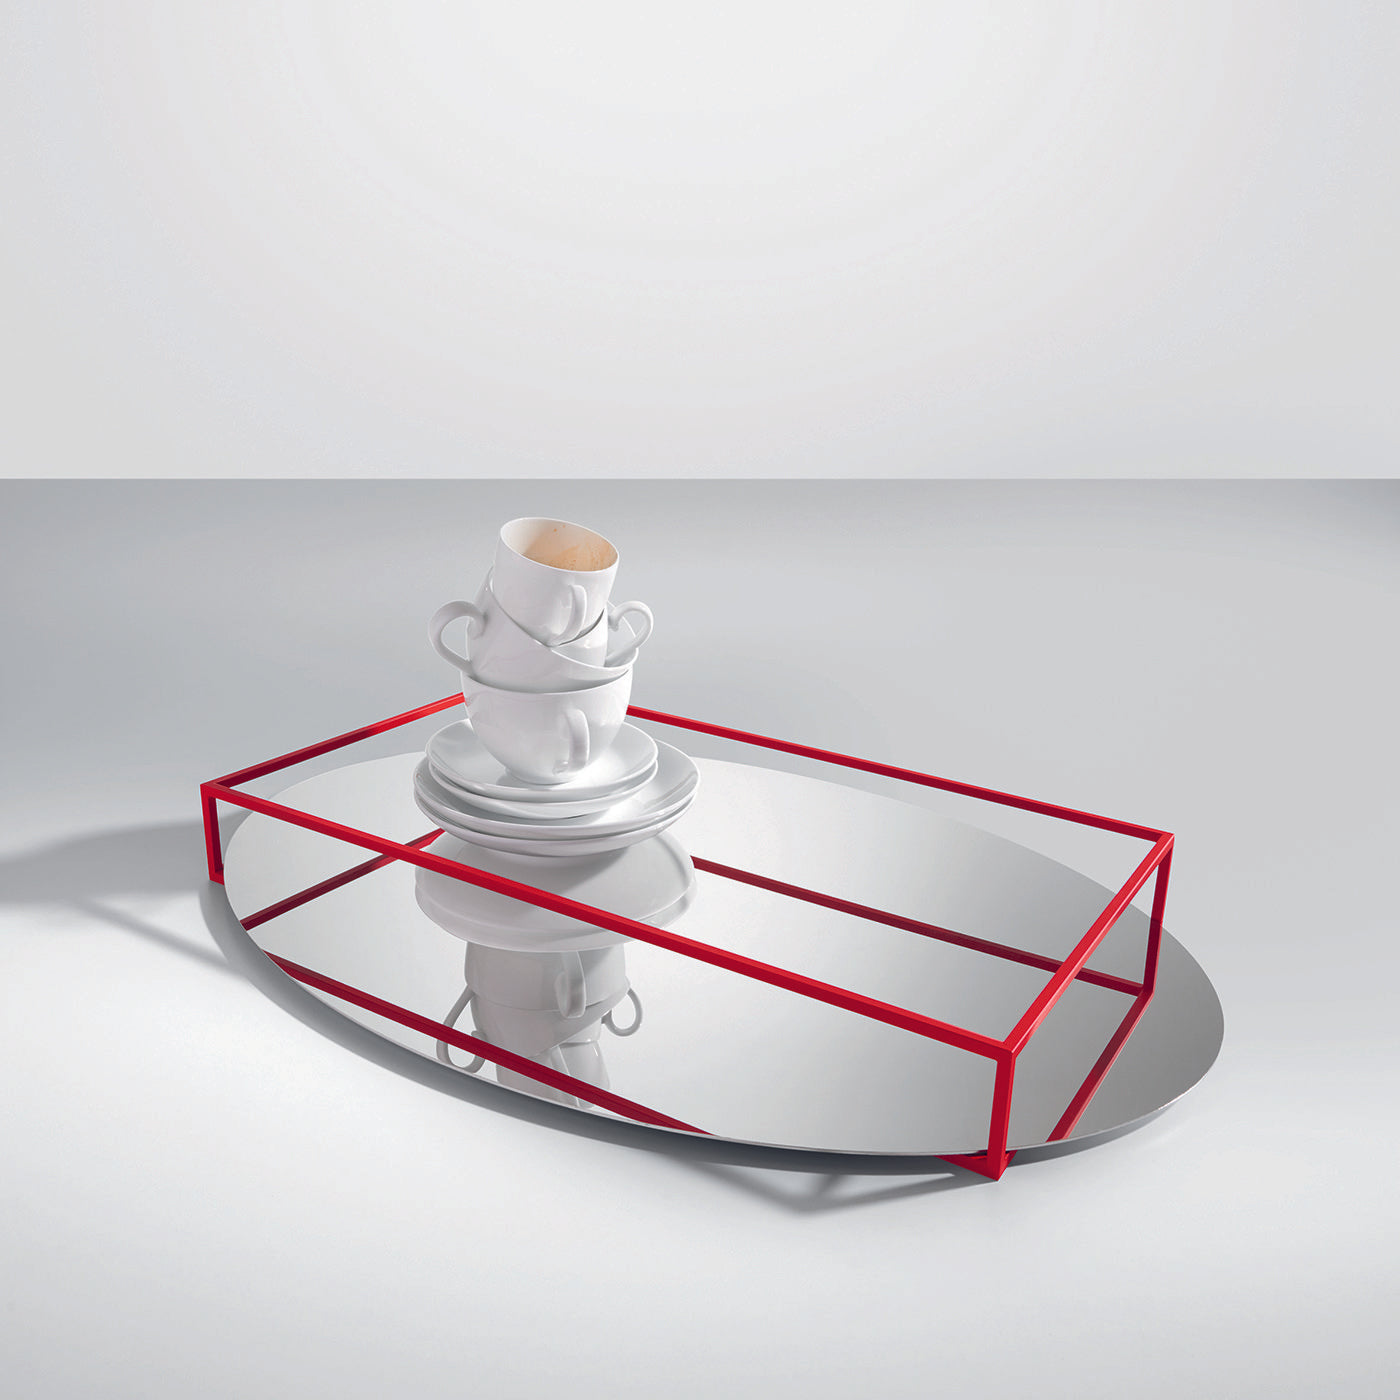 Surface + Border N. 2 Red Fruit Tray by Ron Gilad - Alternative view 1